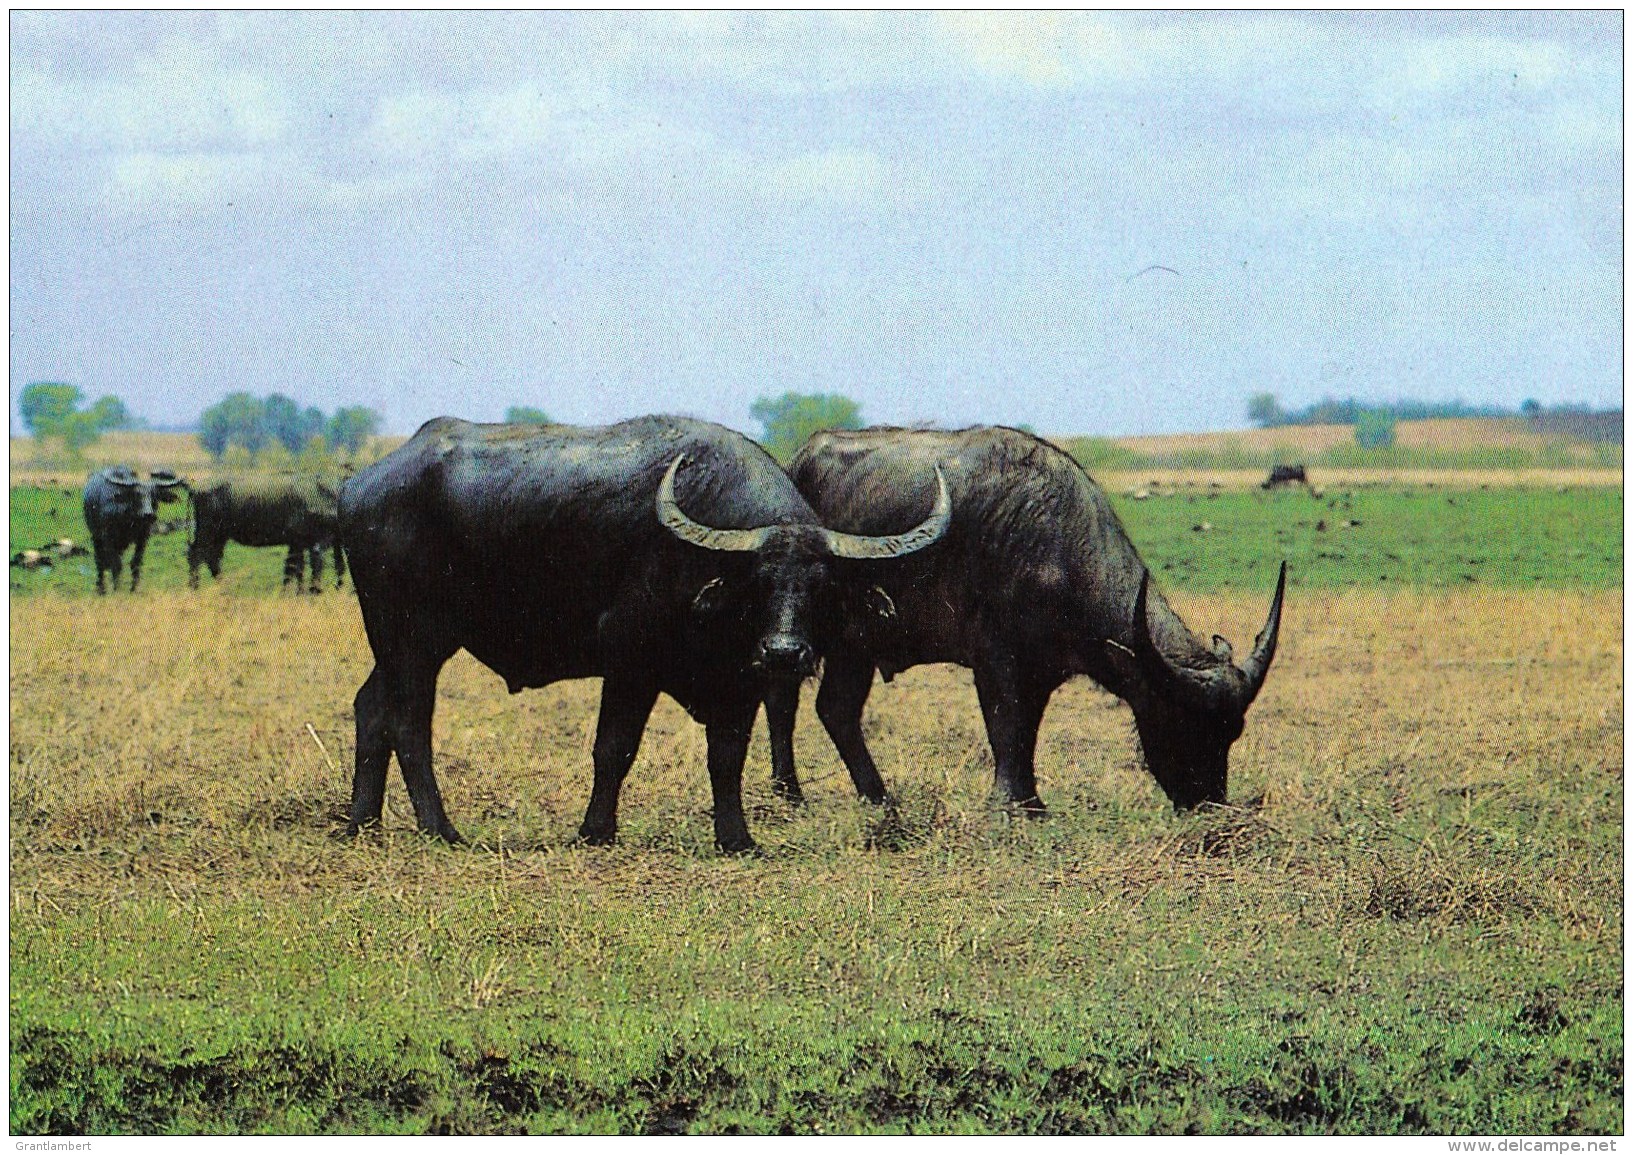 Water Buffalo, Top End, Northern Territory Unused - Non Classés